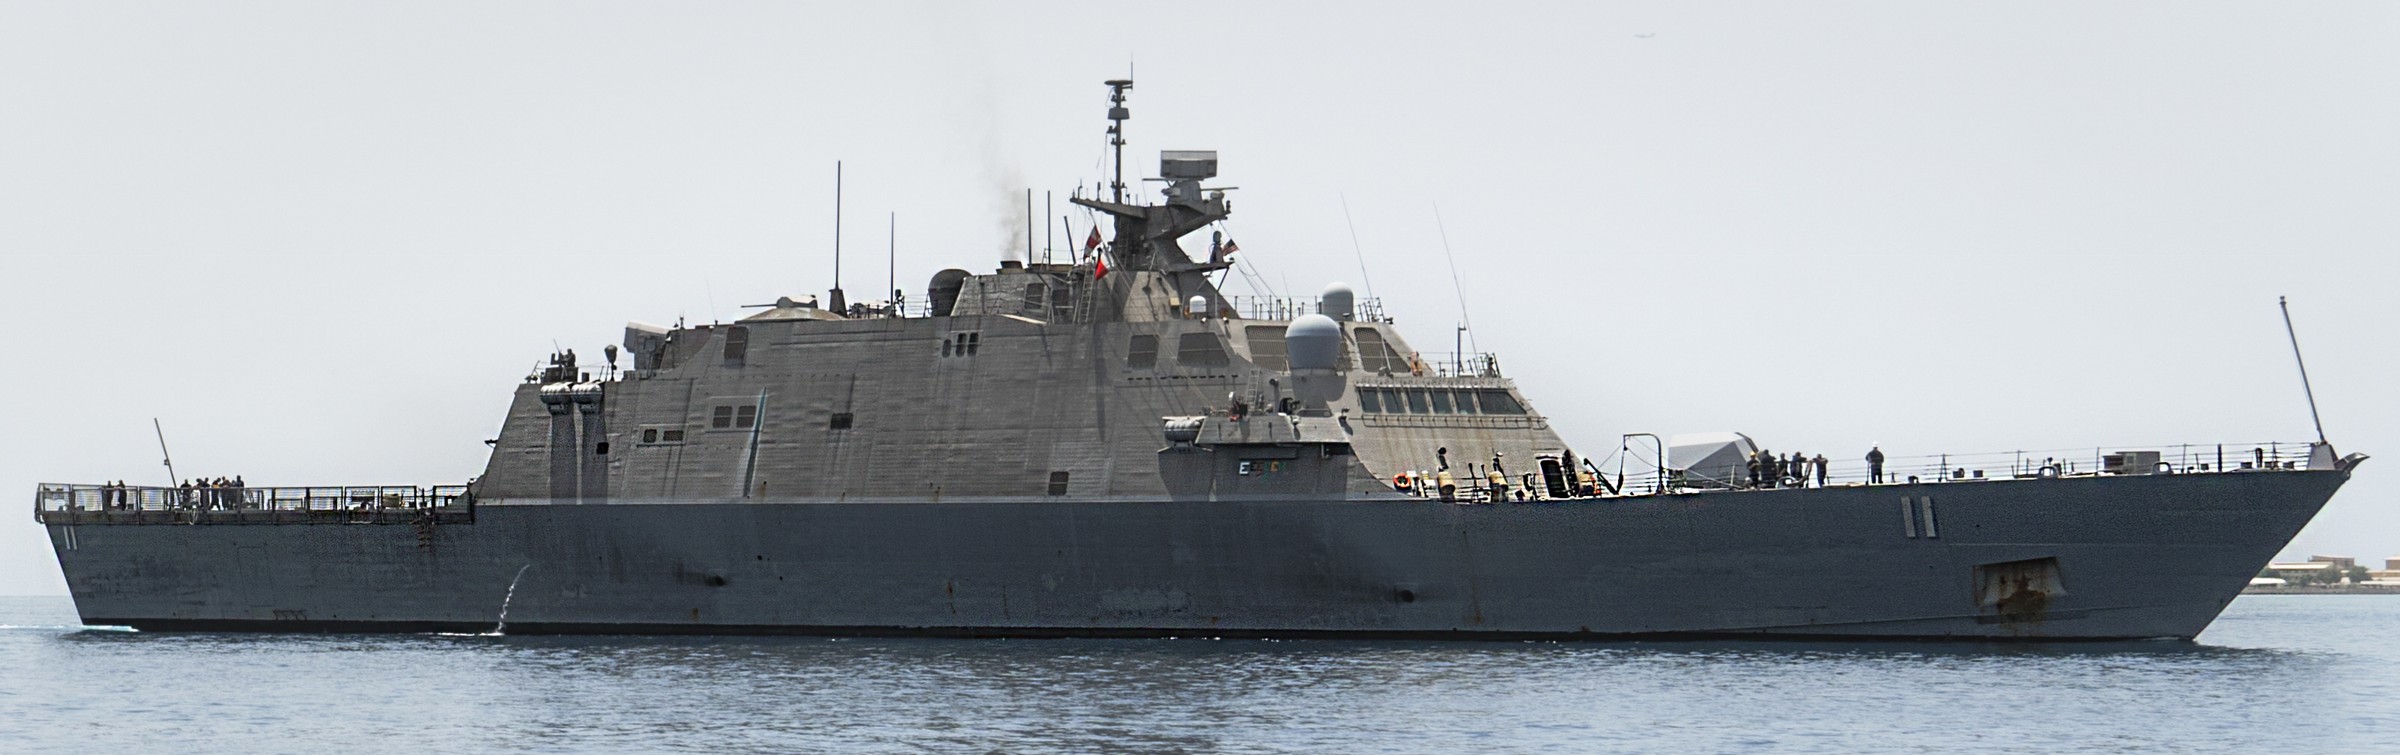 lcs-11 uss sioux city freedom class littoral combat ship us navy djibouti 93